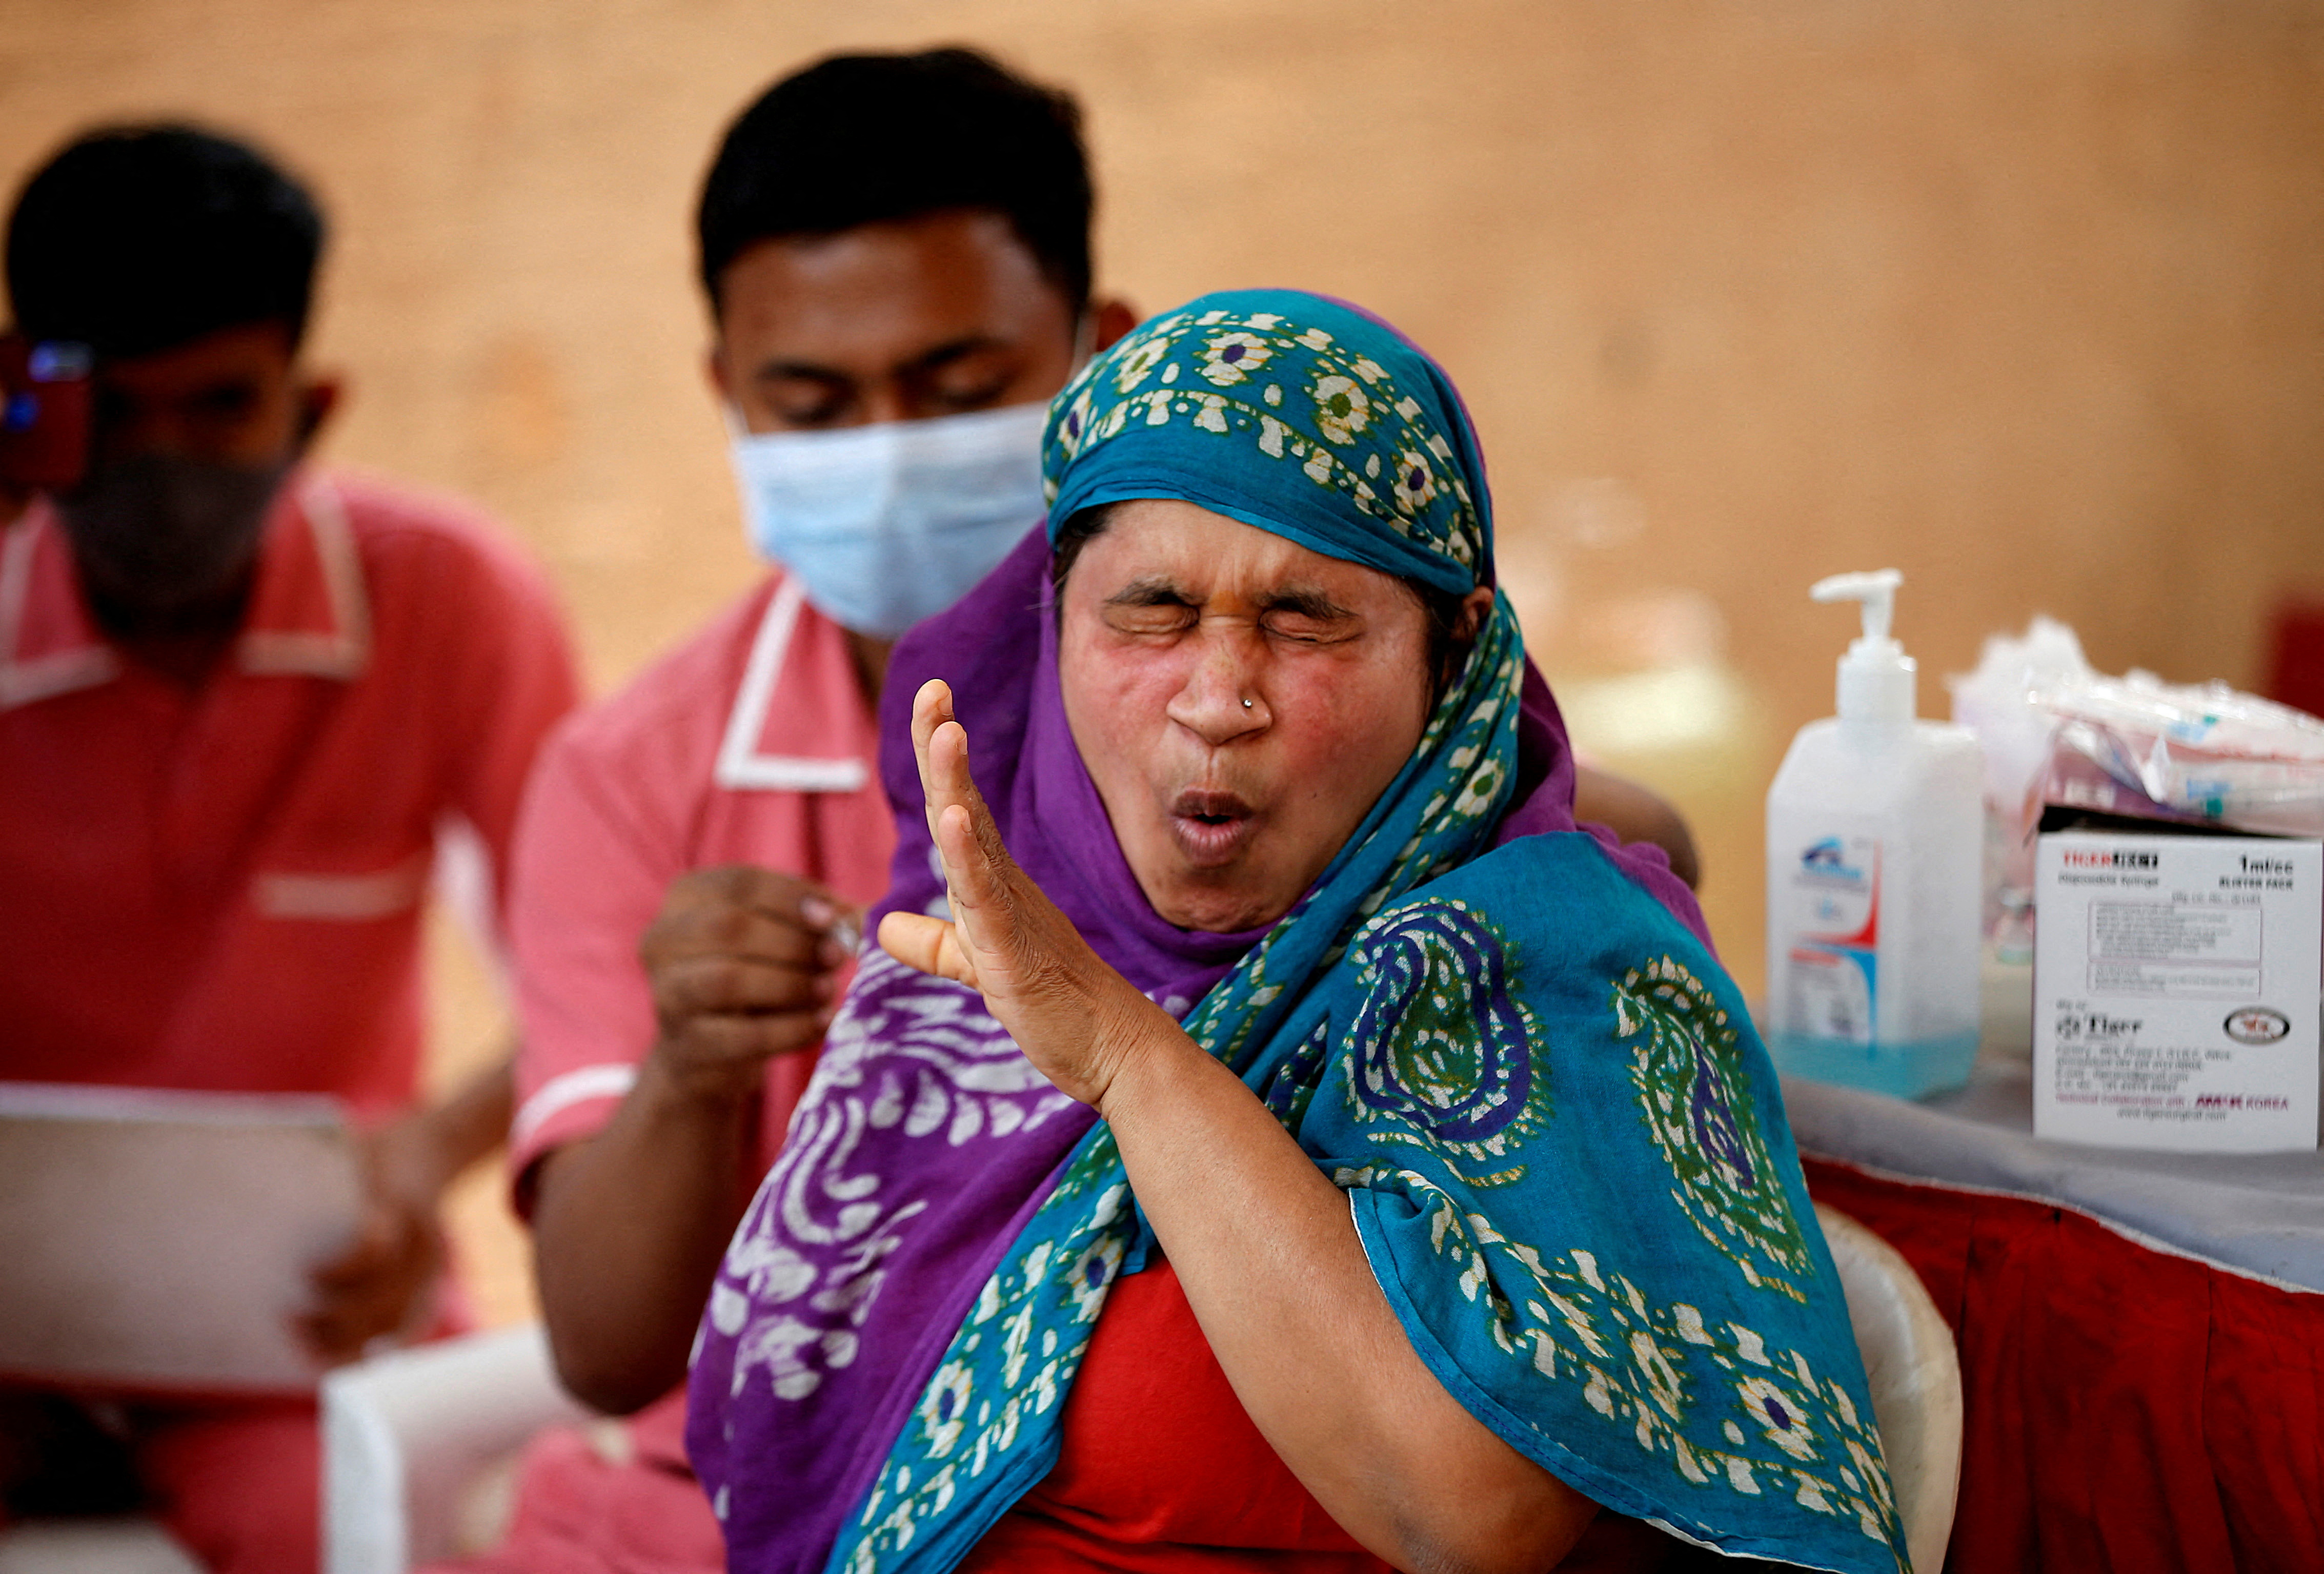 A woman reacts as she receives a dose of the COVISHIELD vaccine against the coronavirus disease (COVID-19) in Ahmedabad